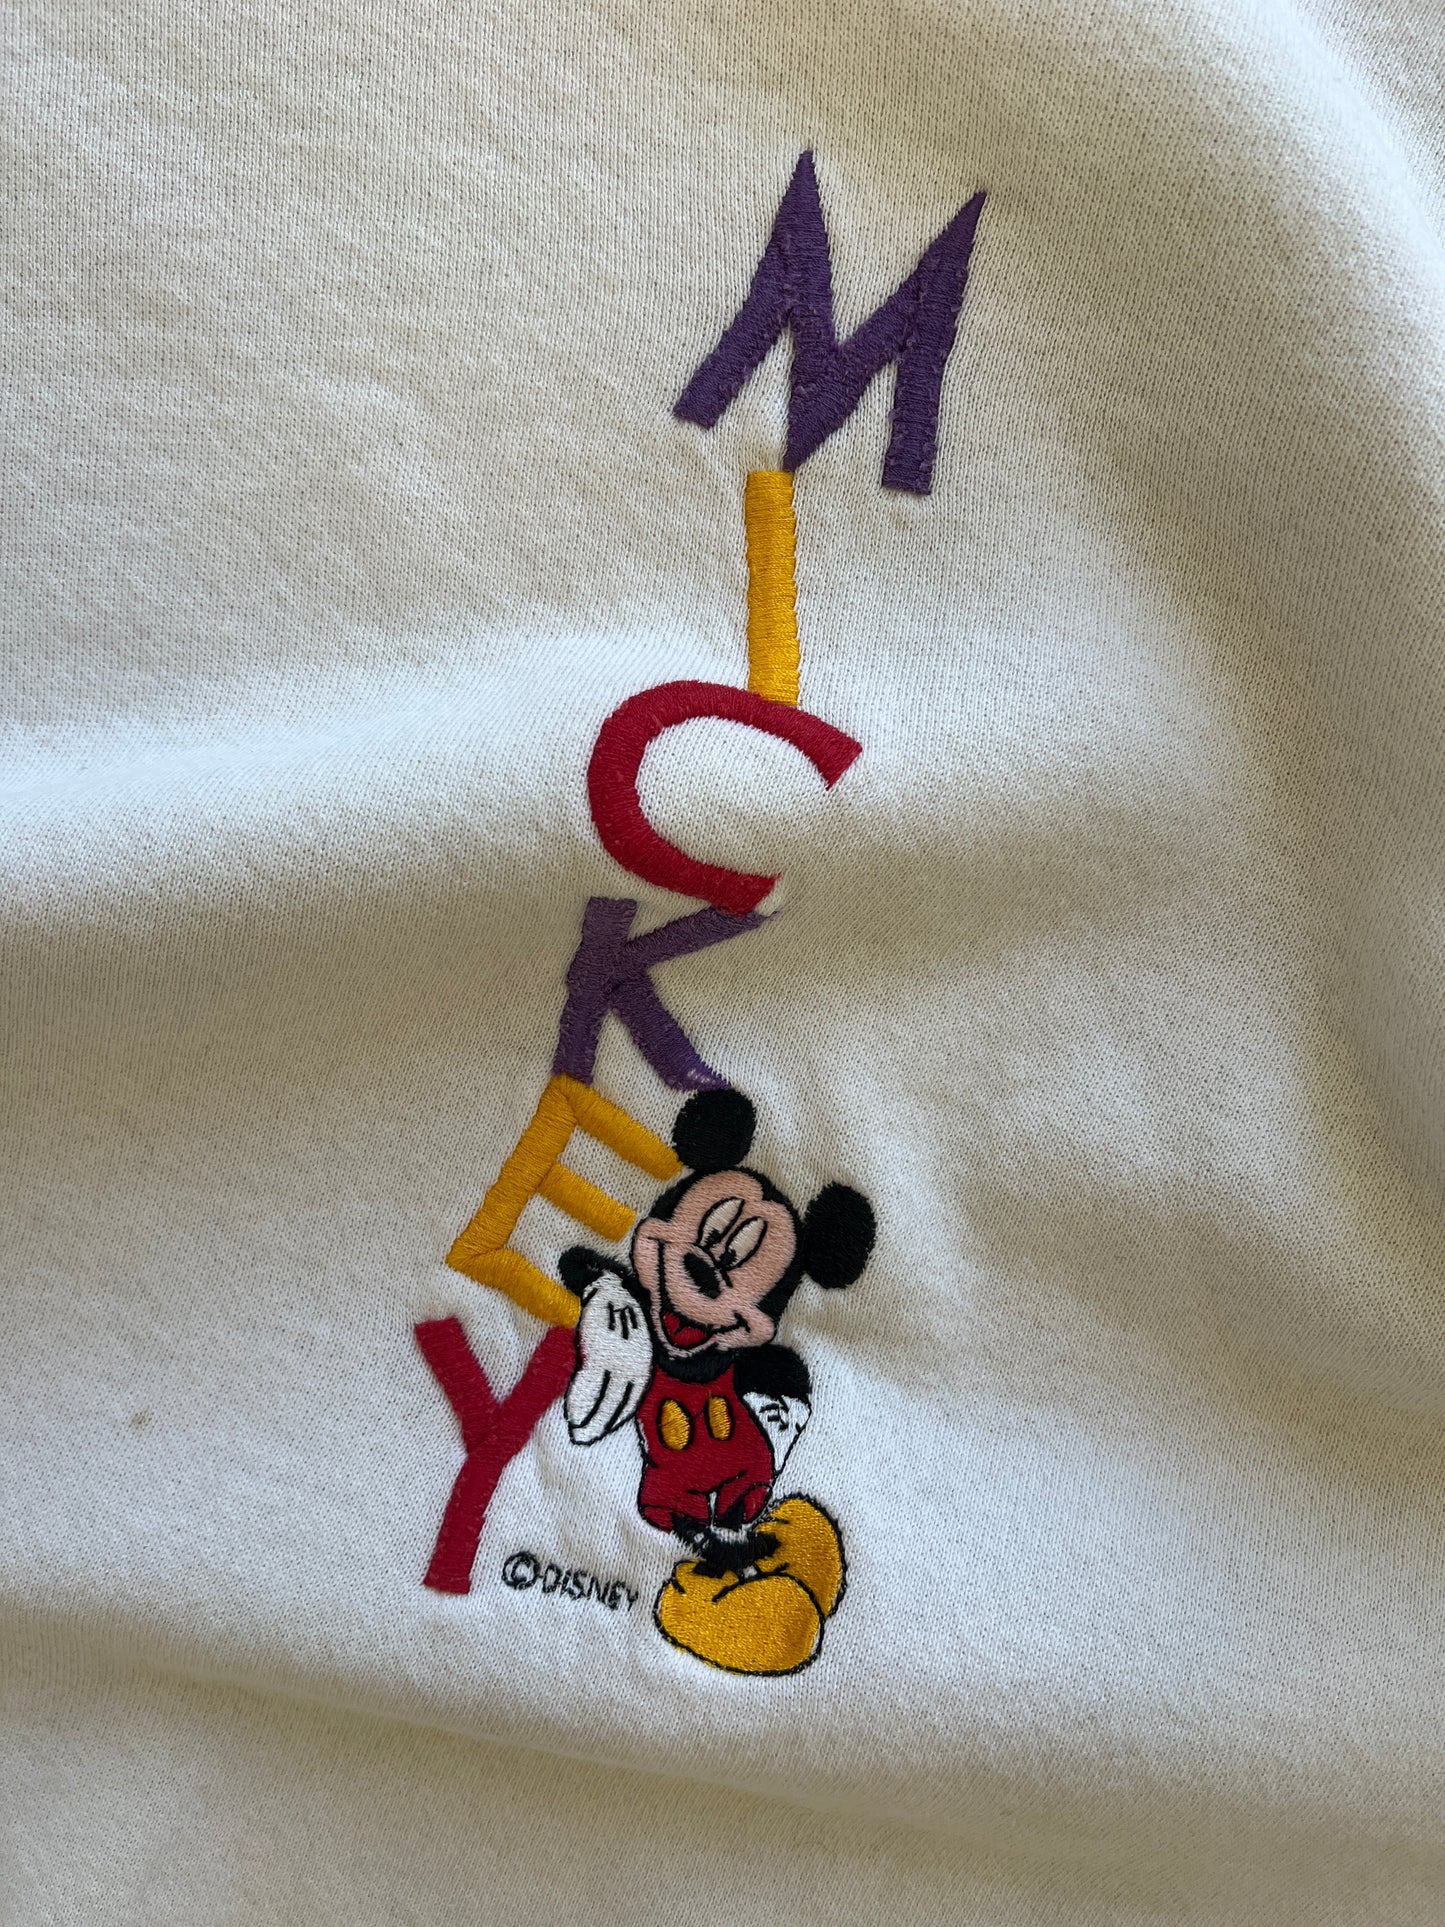 Vintage Embroidered Mickey Crew - M